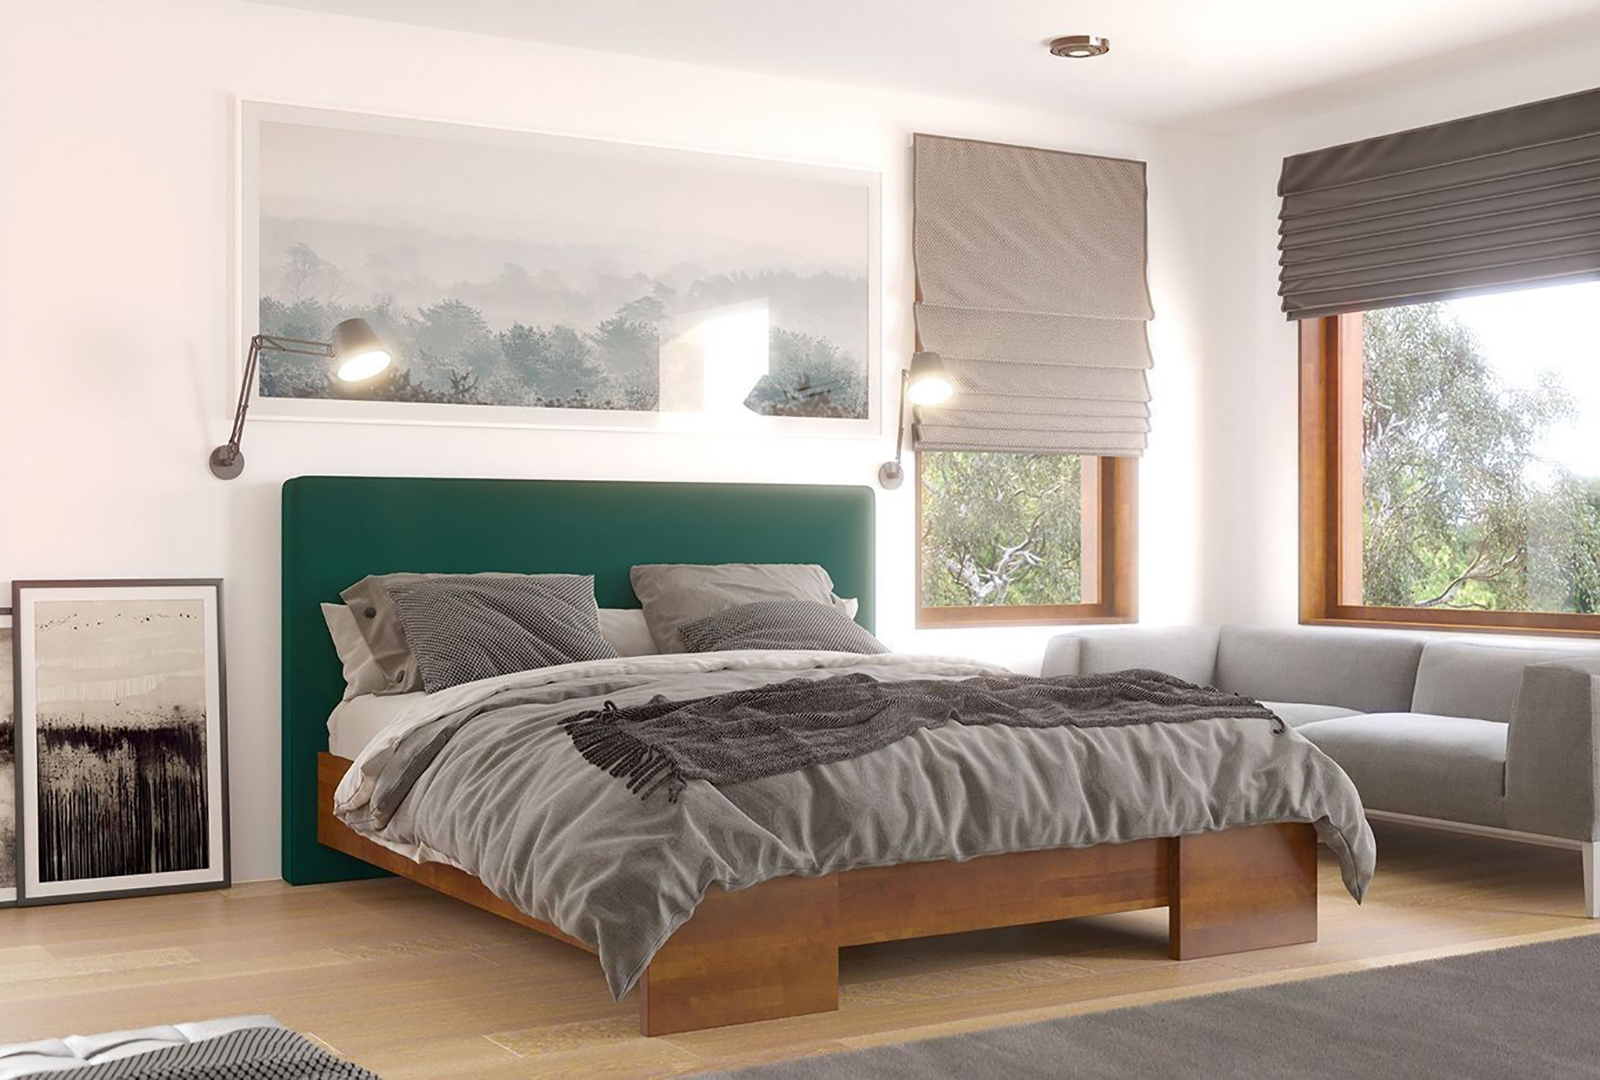 VISBY HESSEL WOODEN BEECH BED WITH AN UPHOLSTERED HEADBOARD 2